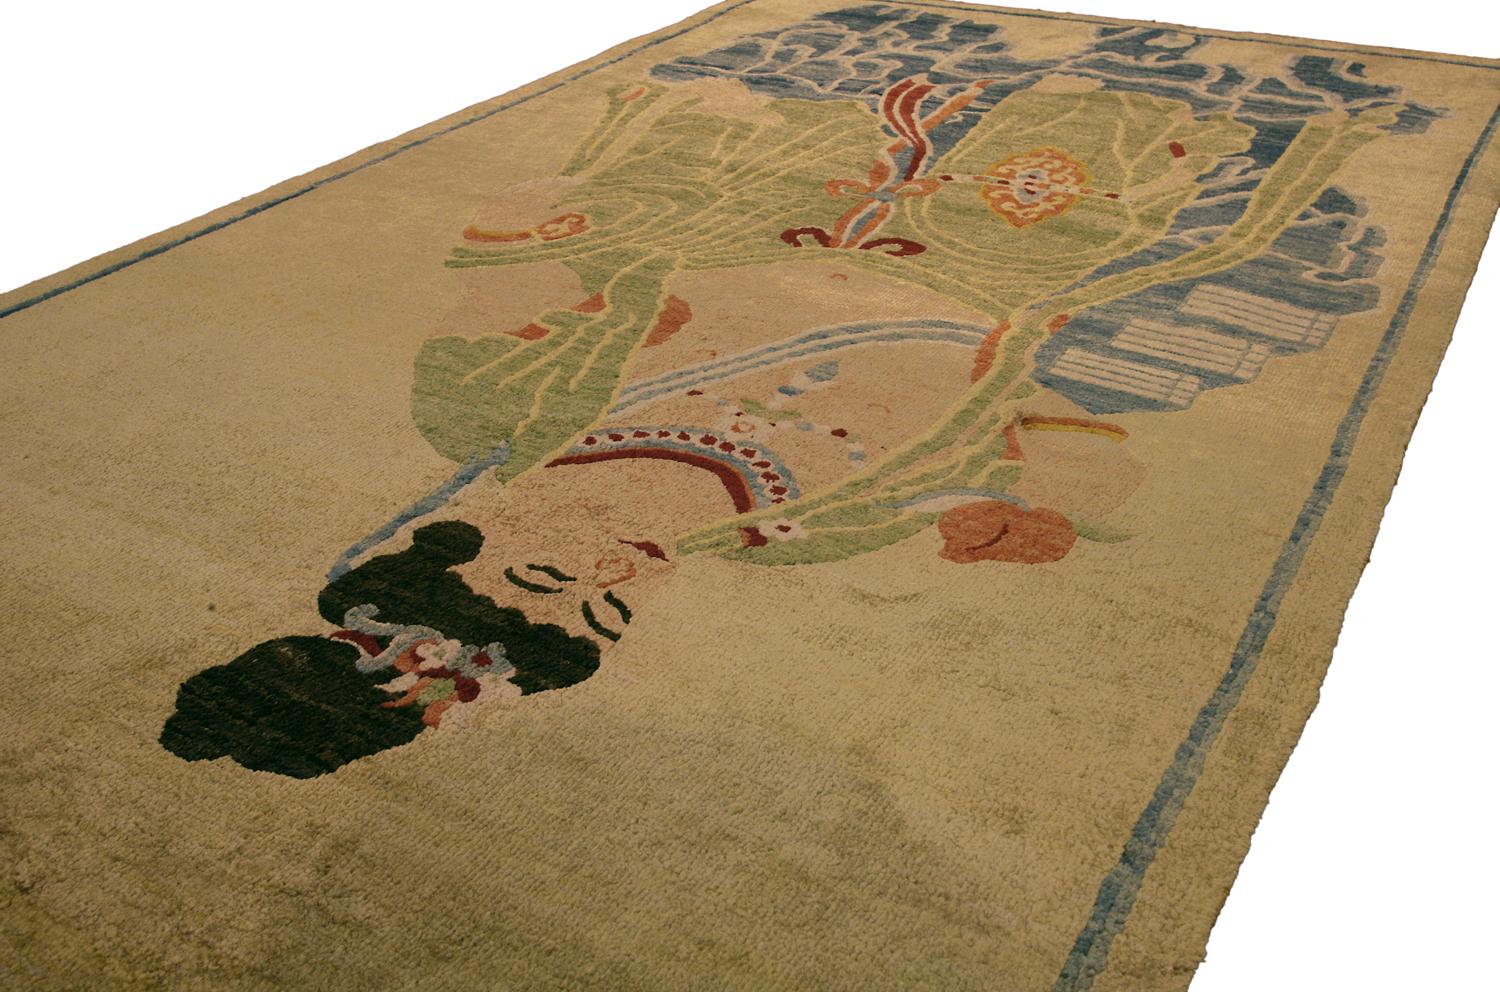 This is an extremely rare pictorial Peking rug woven in China during the end of the 19th century circa 1890 in measures 205 x120 CM in size. This pictorial rug is extremely unique and depicts a member of the royal family sitting and gazing at a